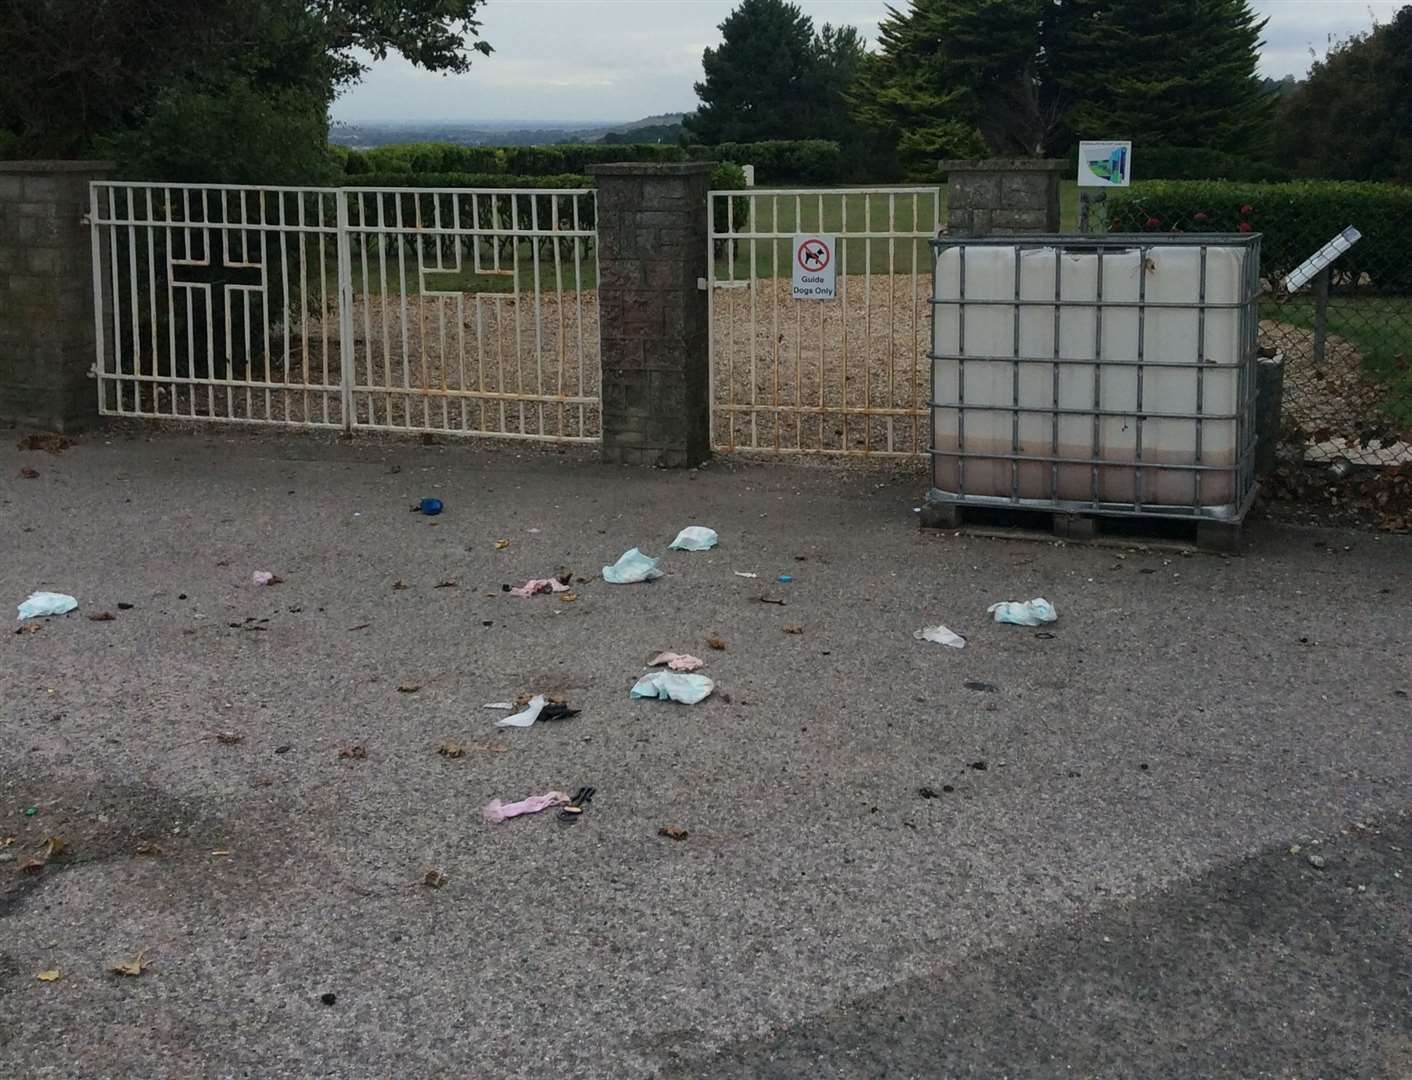 Mess was found near the entrance of the cemetery, as well as inside